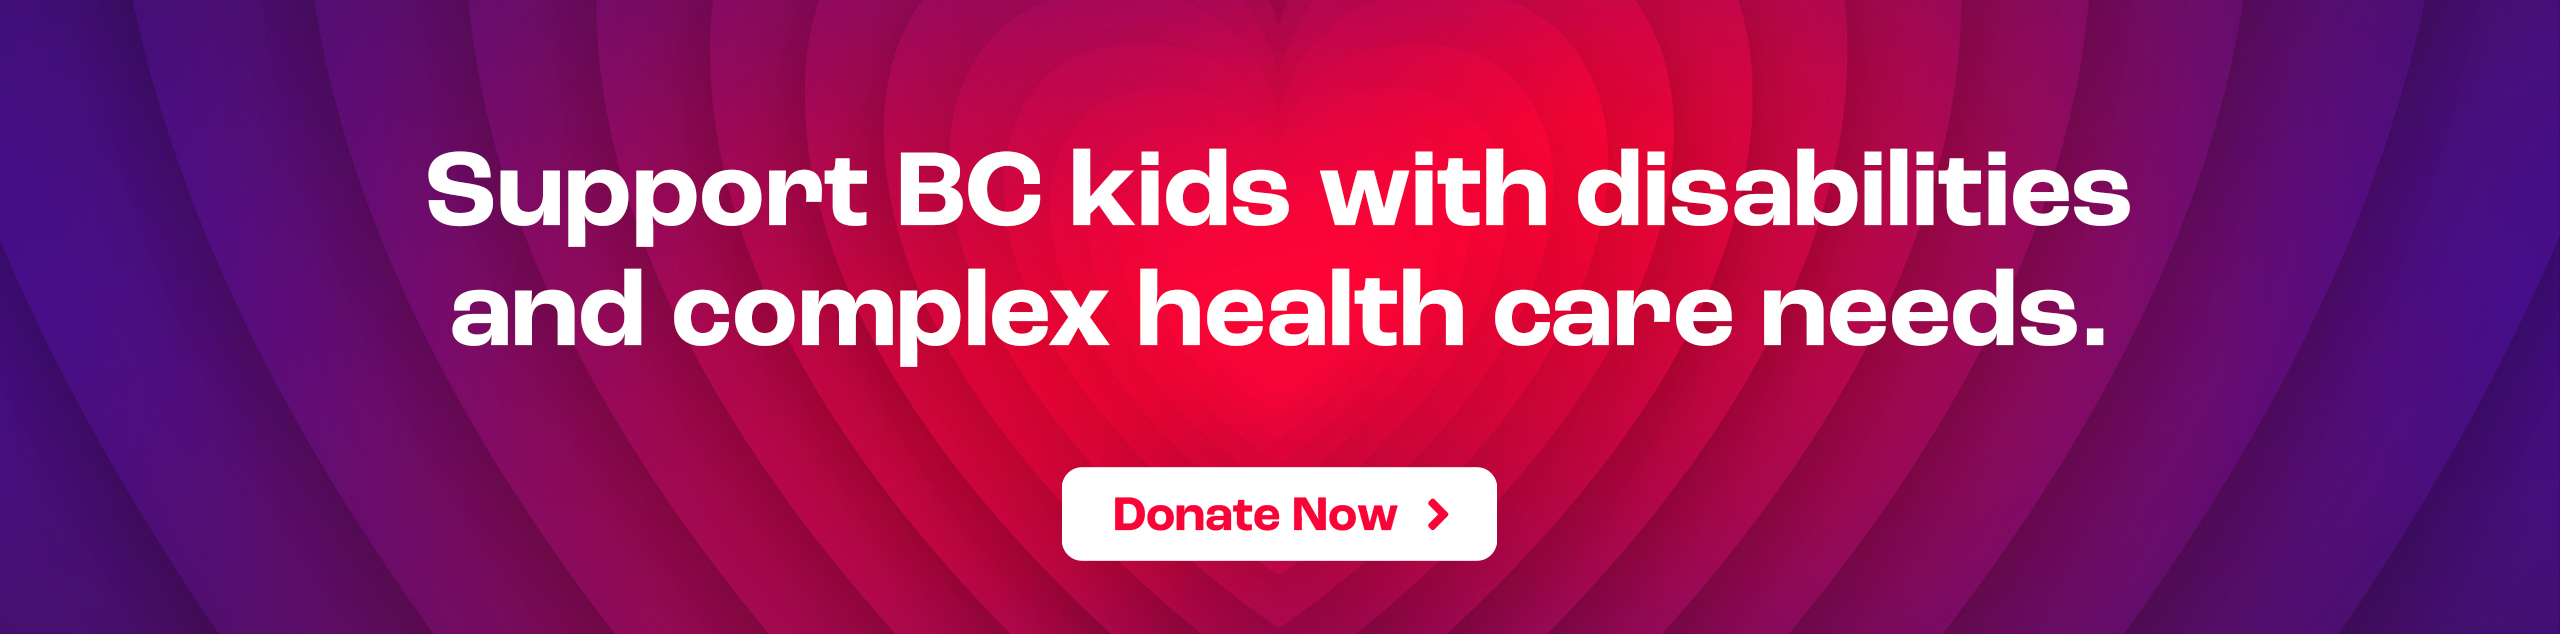 Support BC kids with disabilities and complex health care needs.